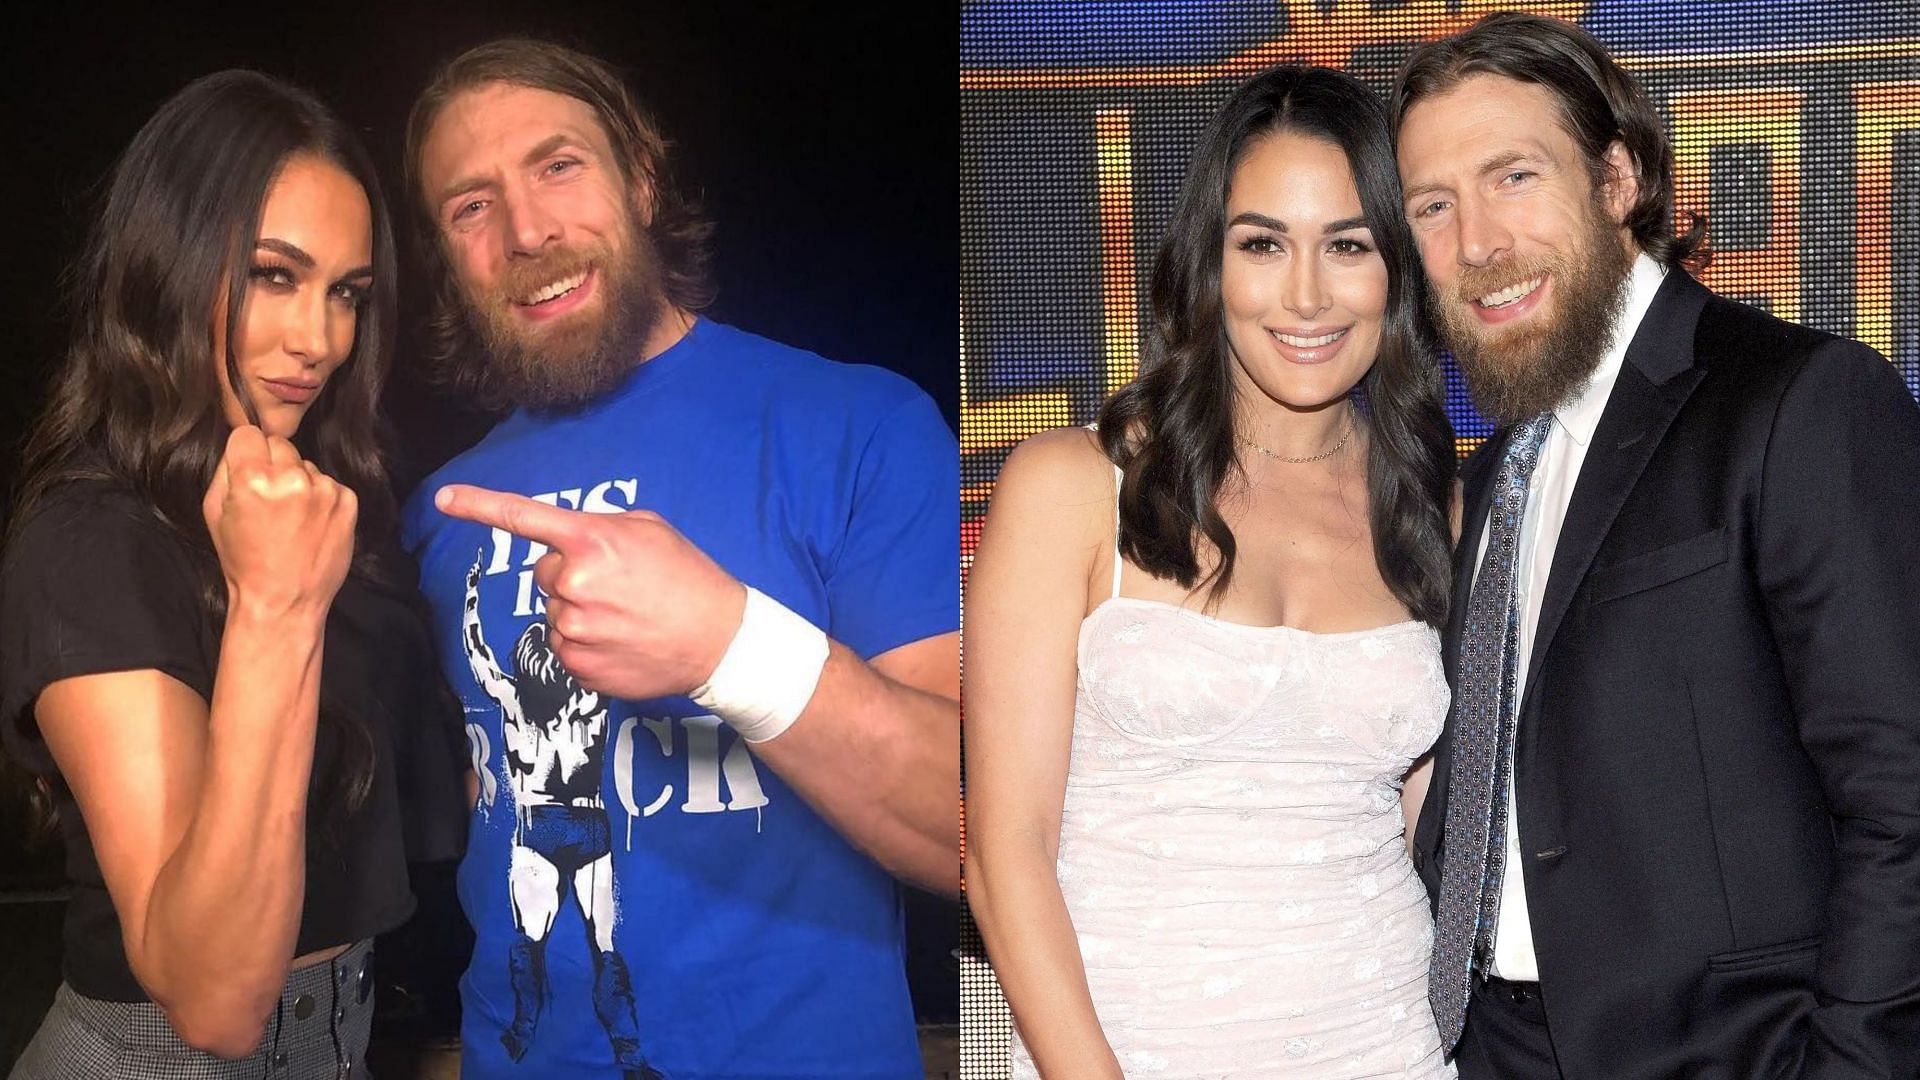 WWE Hall of Famer Brie Bella with her husband, Bryan Danielson